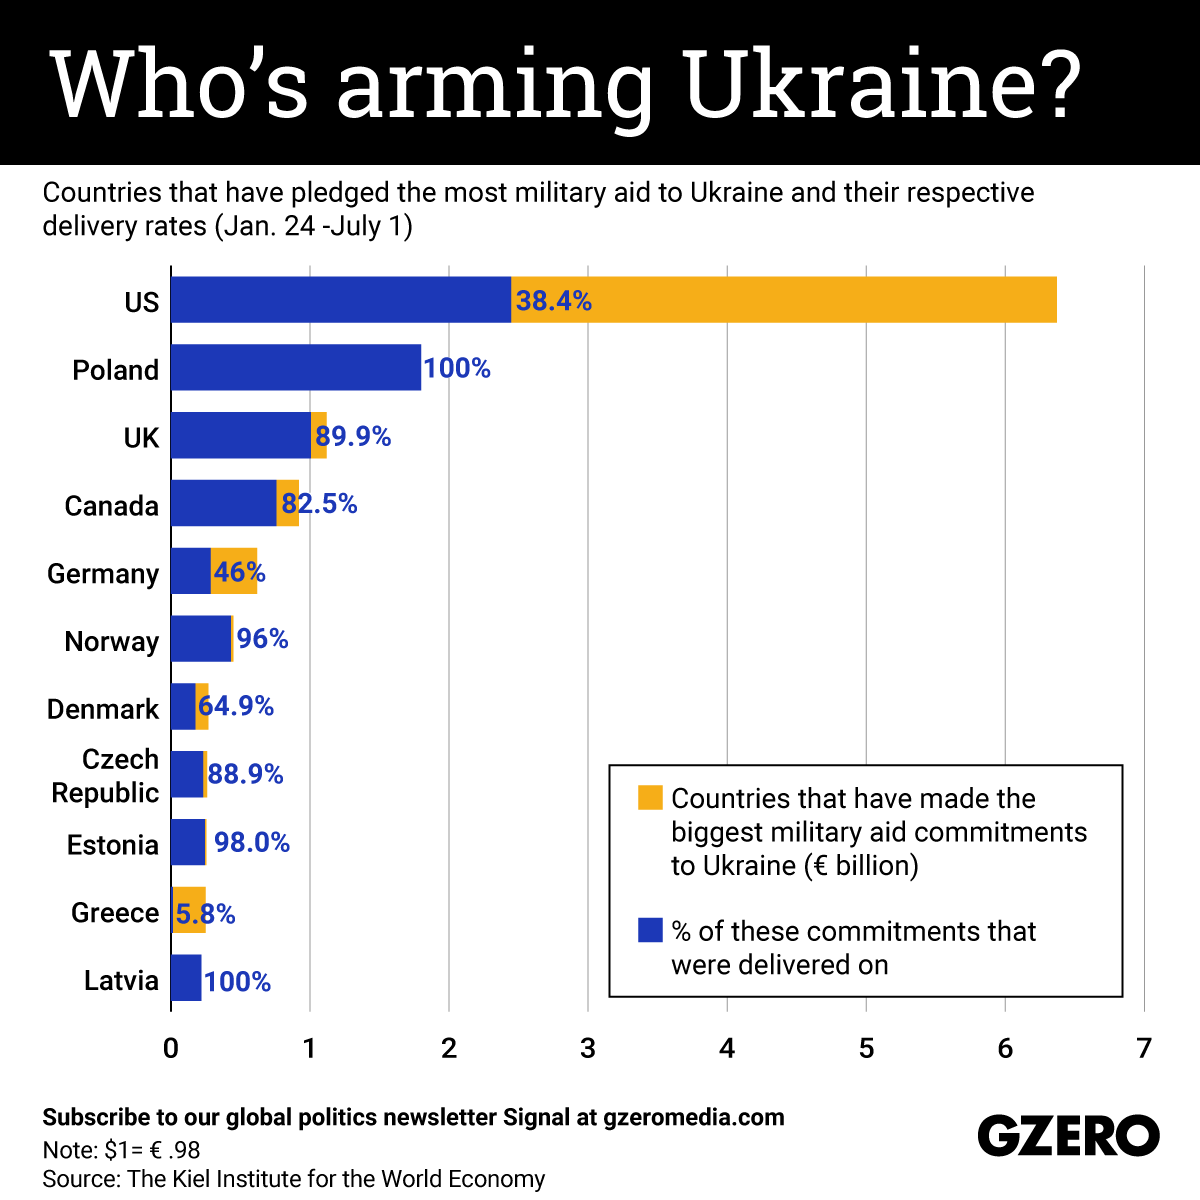 The Graphic Truth: Who's arming Ukraine?